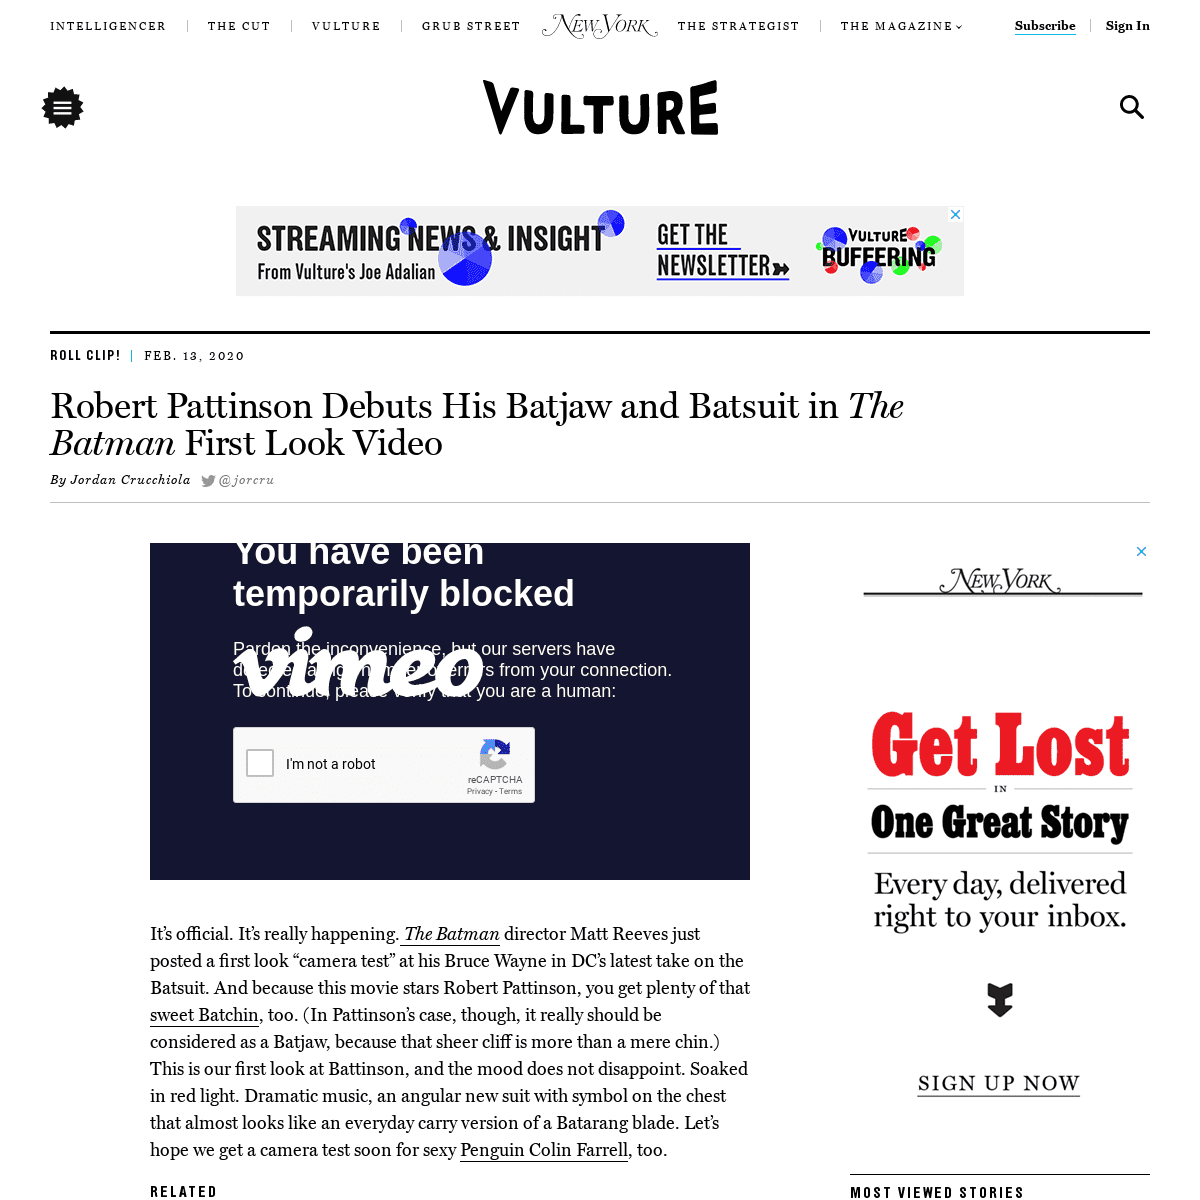 A complete backup of www.vulture.com/2020/02/watch-robert-pattinsons-batsuit-in-the-batman-first-look.html